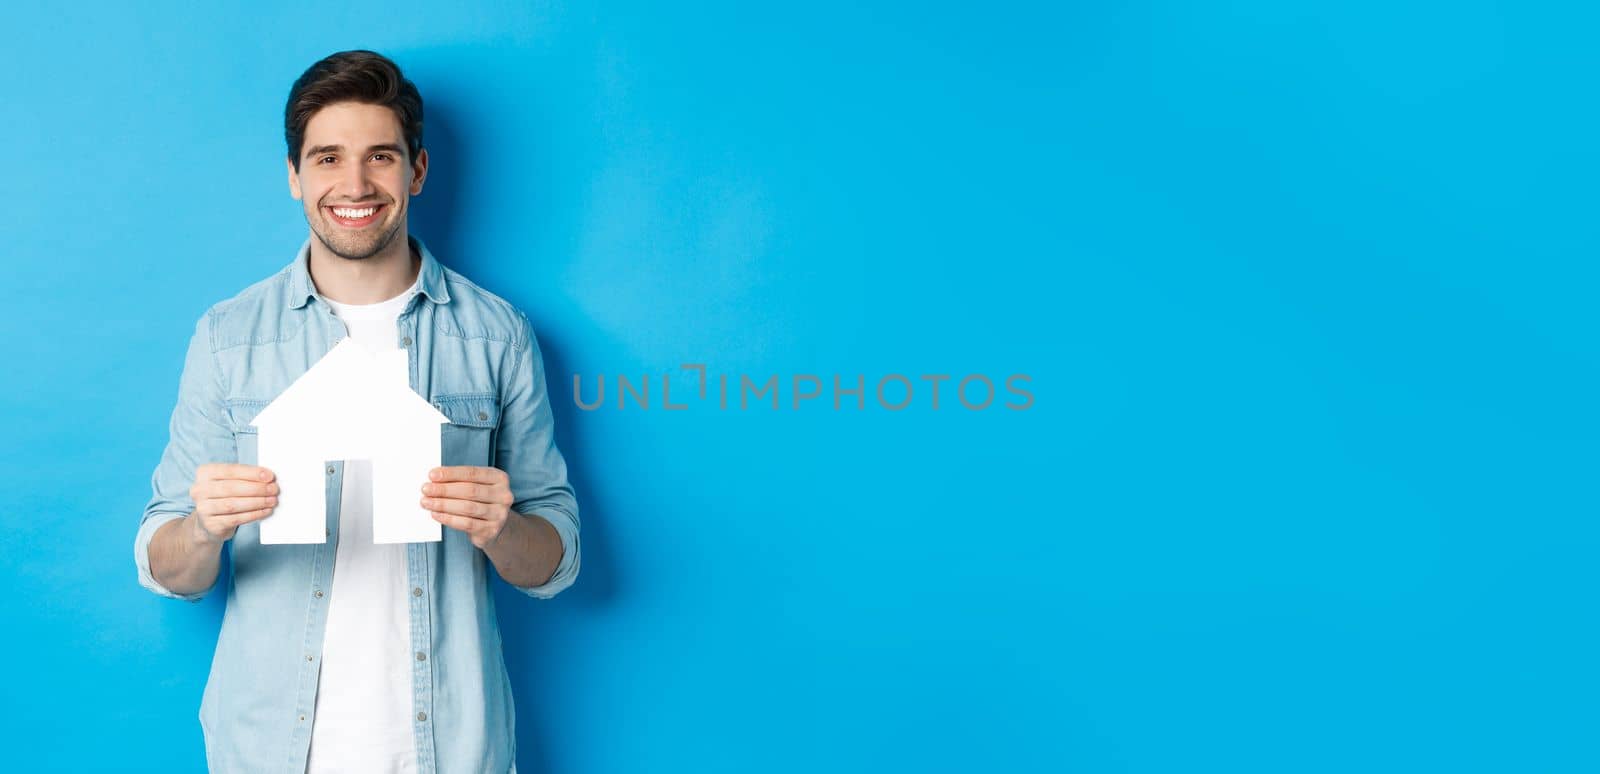 Insurance, mortgage and real estate concept. Smiling young man holding house model, searching apartment for rent, standing against blue background.